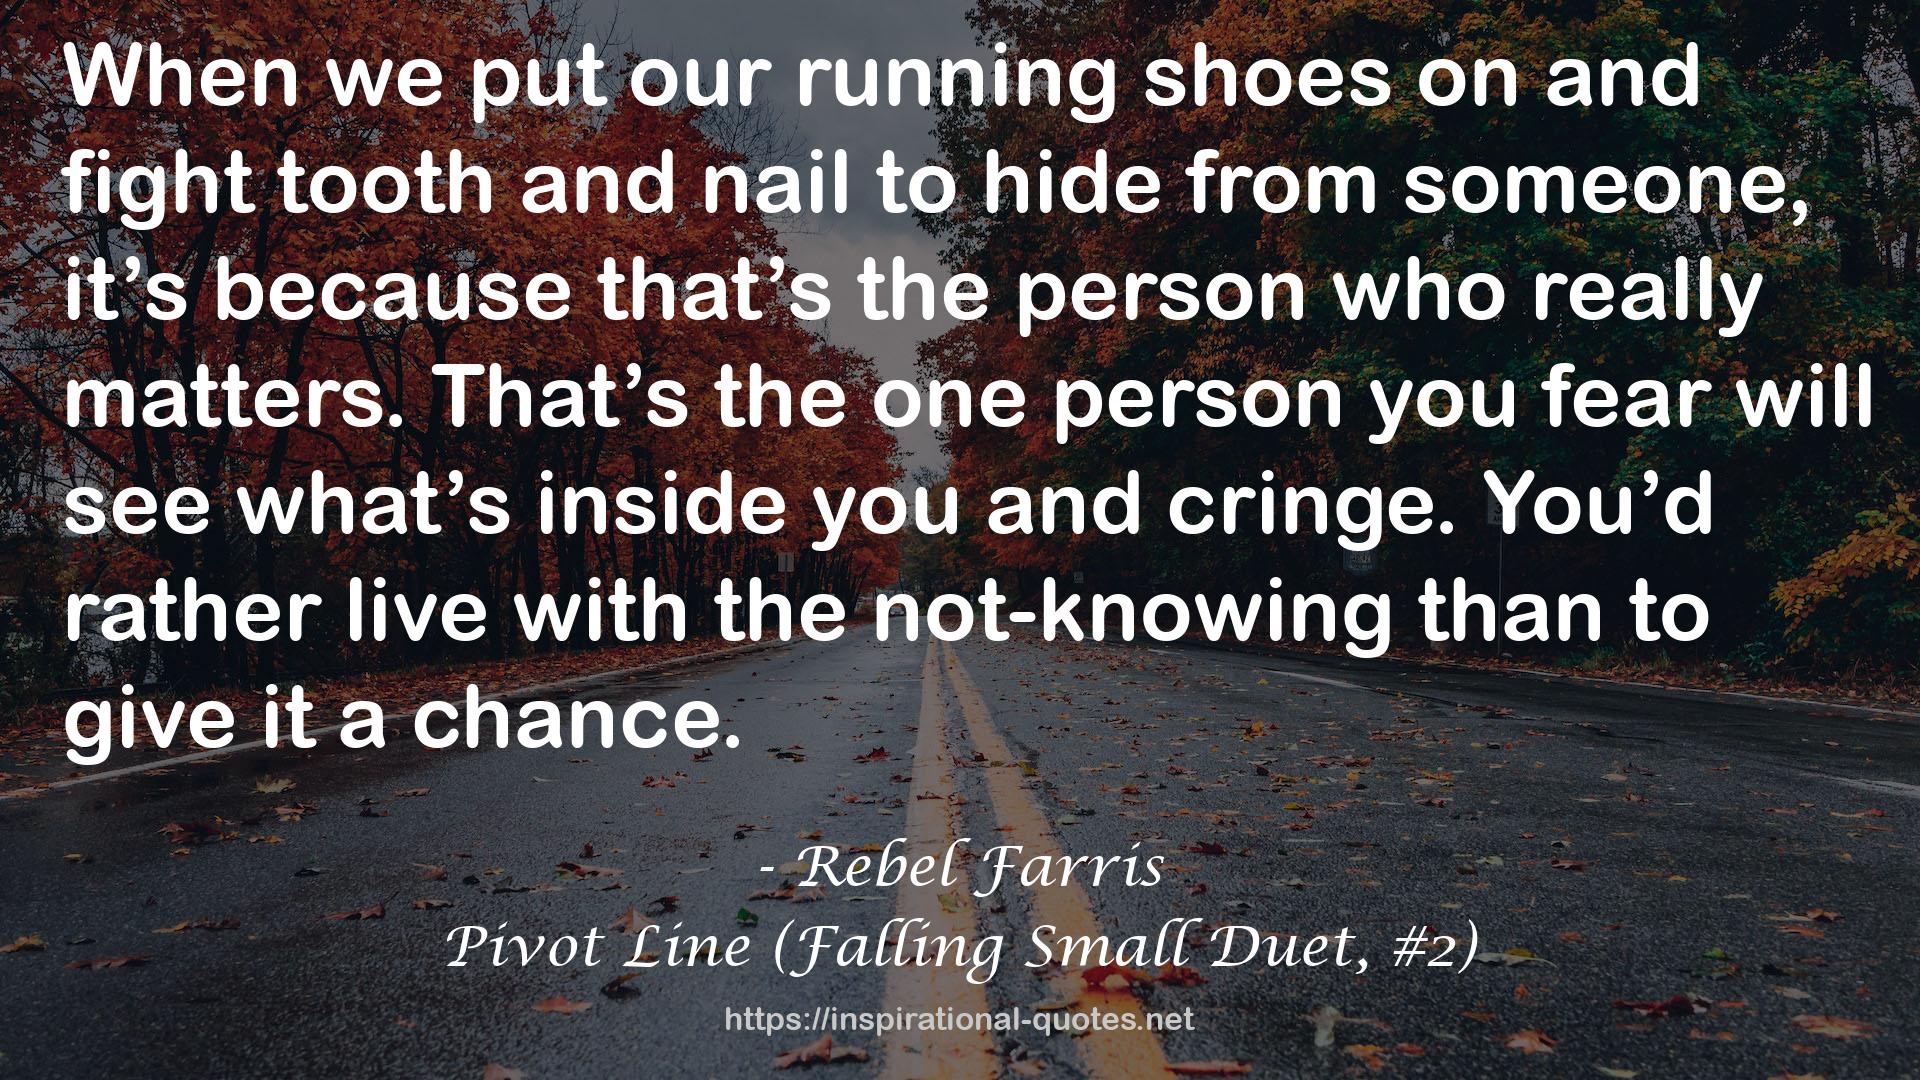 Pivot Line (Falling Small Duet, #2) QUOTES